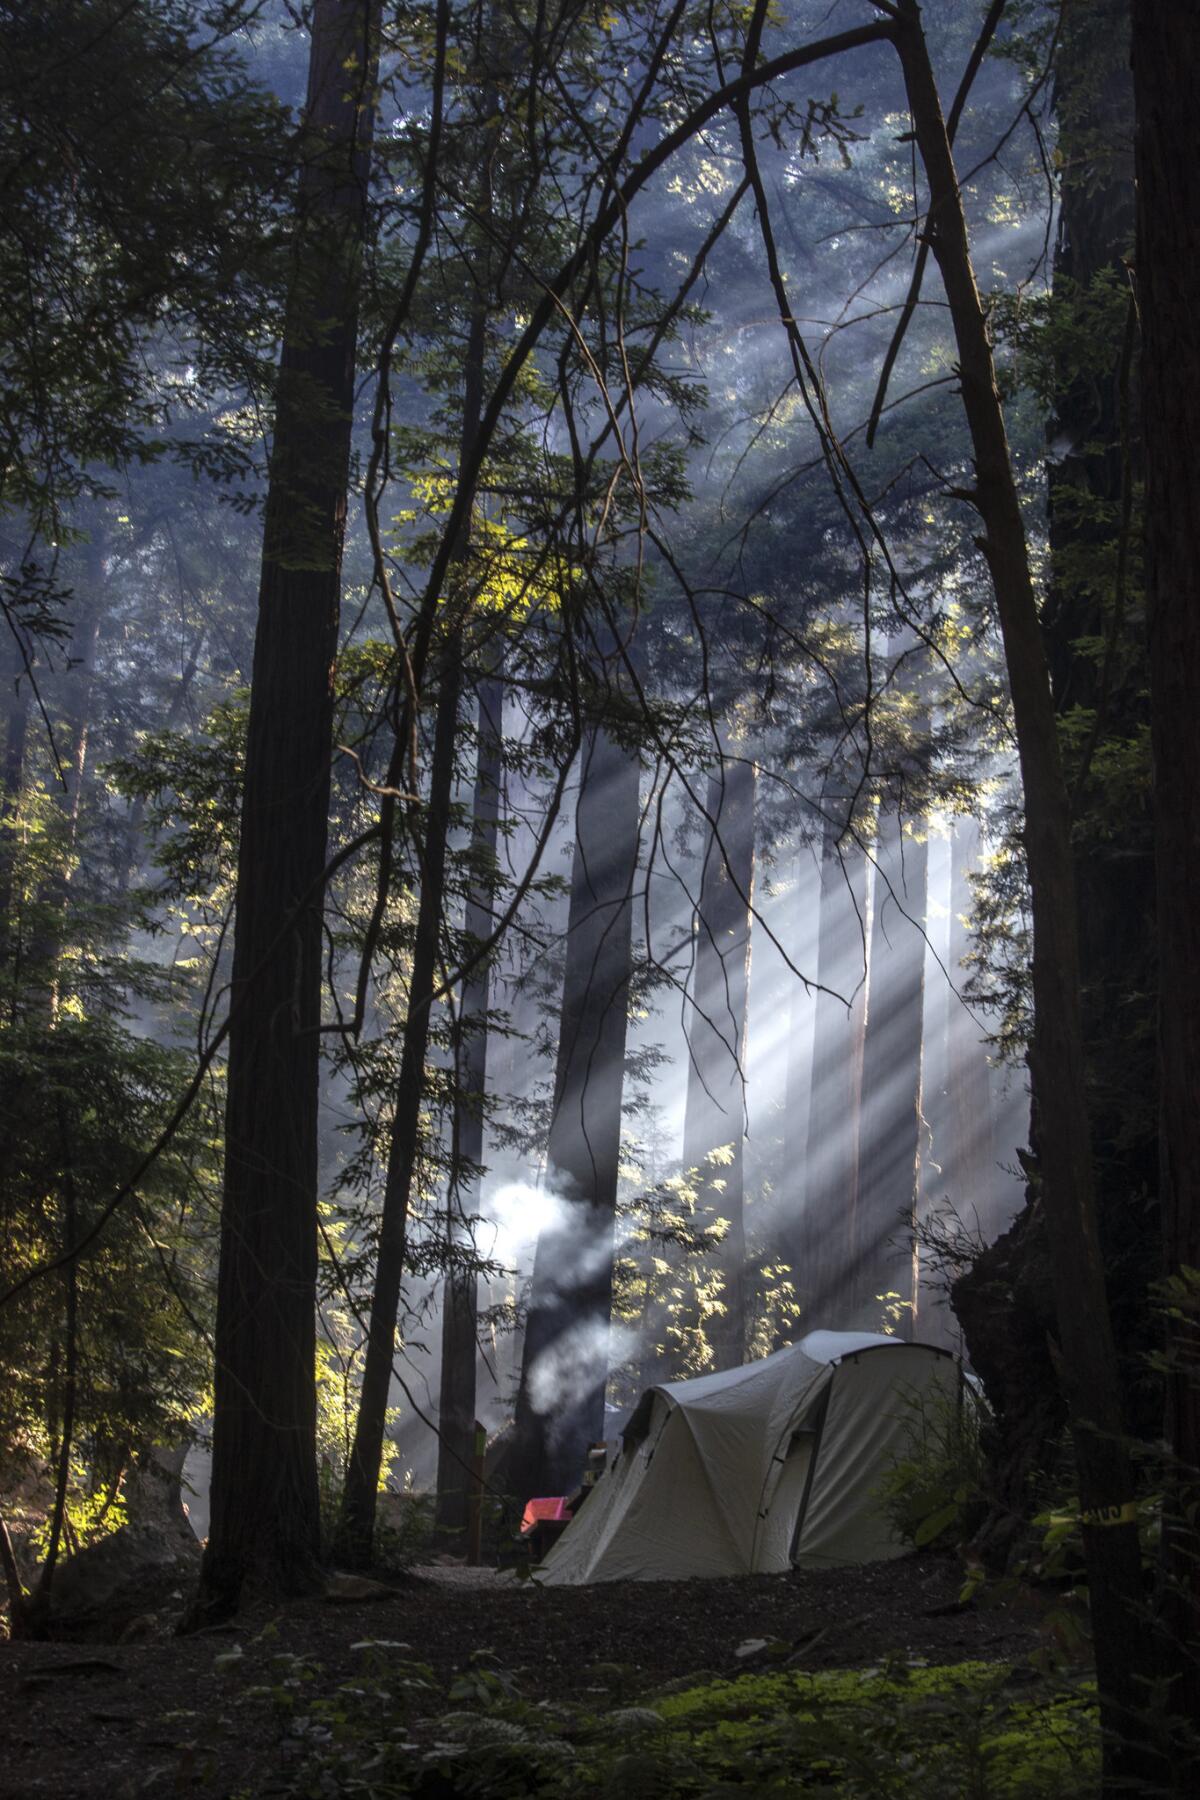 Smoke from early-morning campfires filters through redwoods in the Ventana Campground on the Big Sur coast along Highway 1.